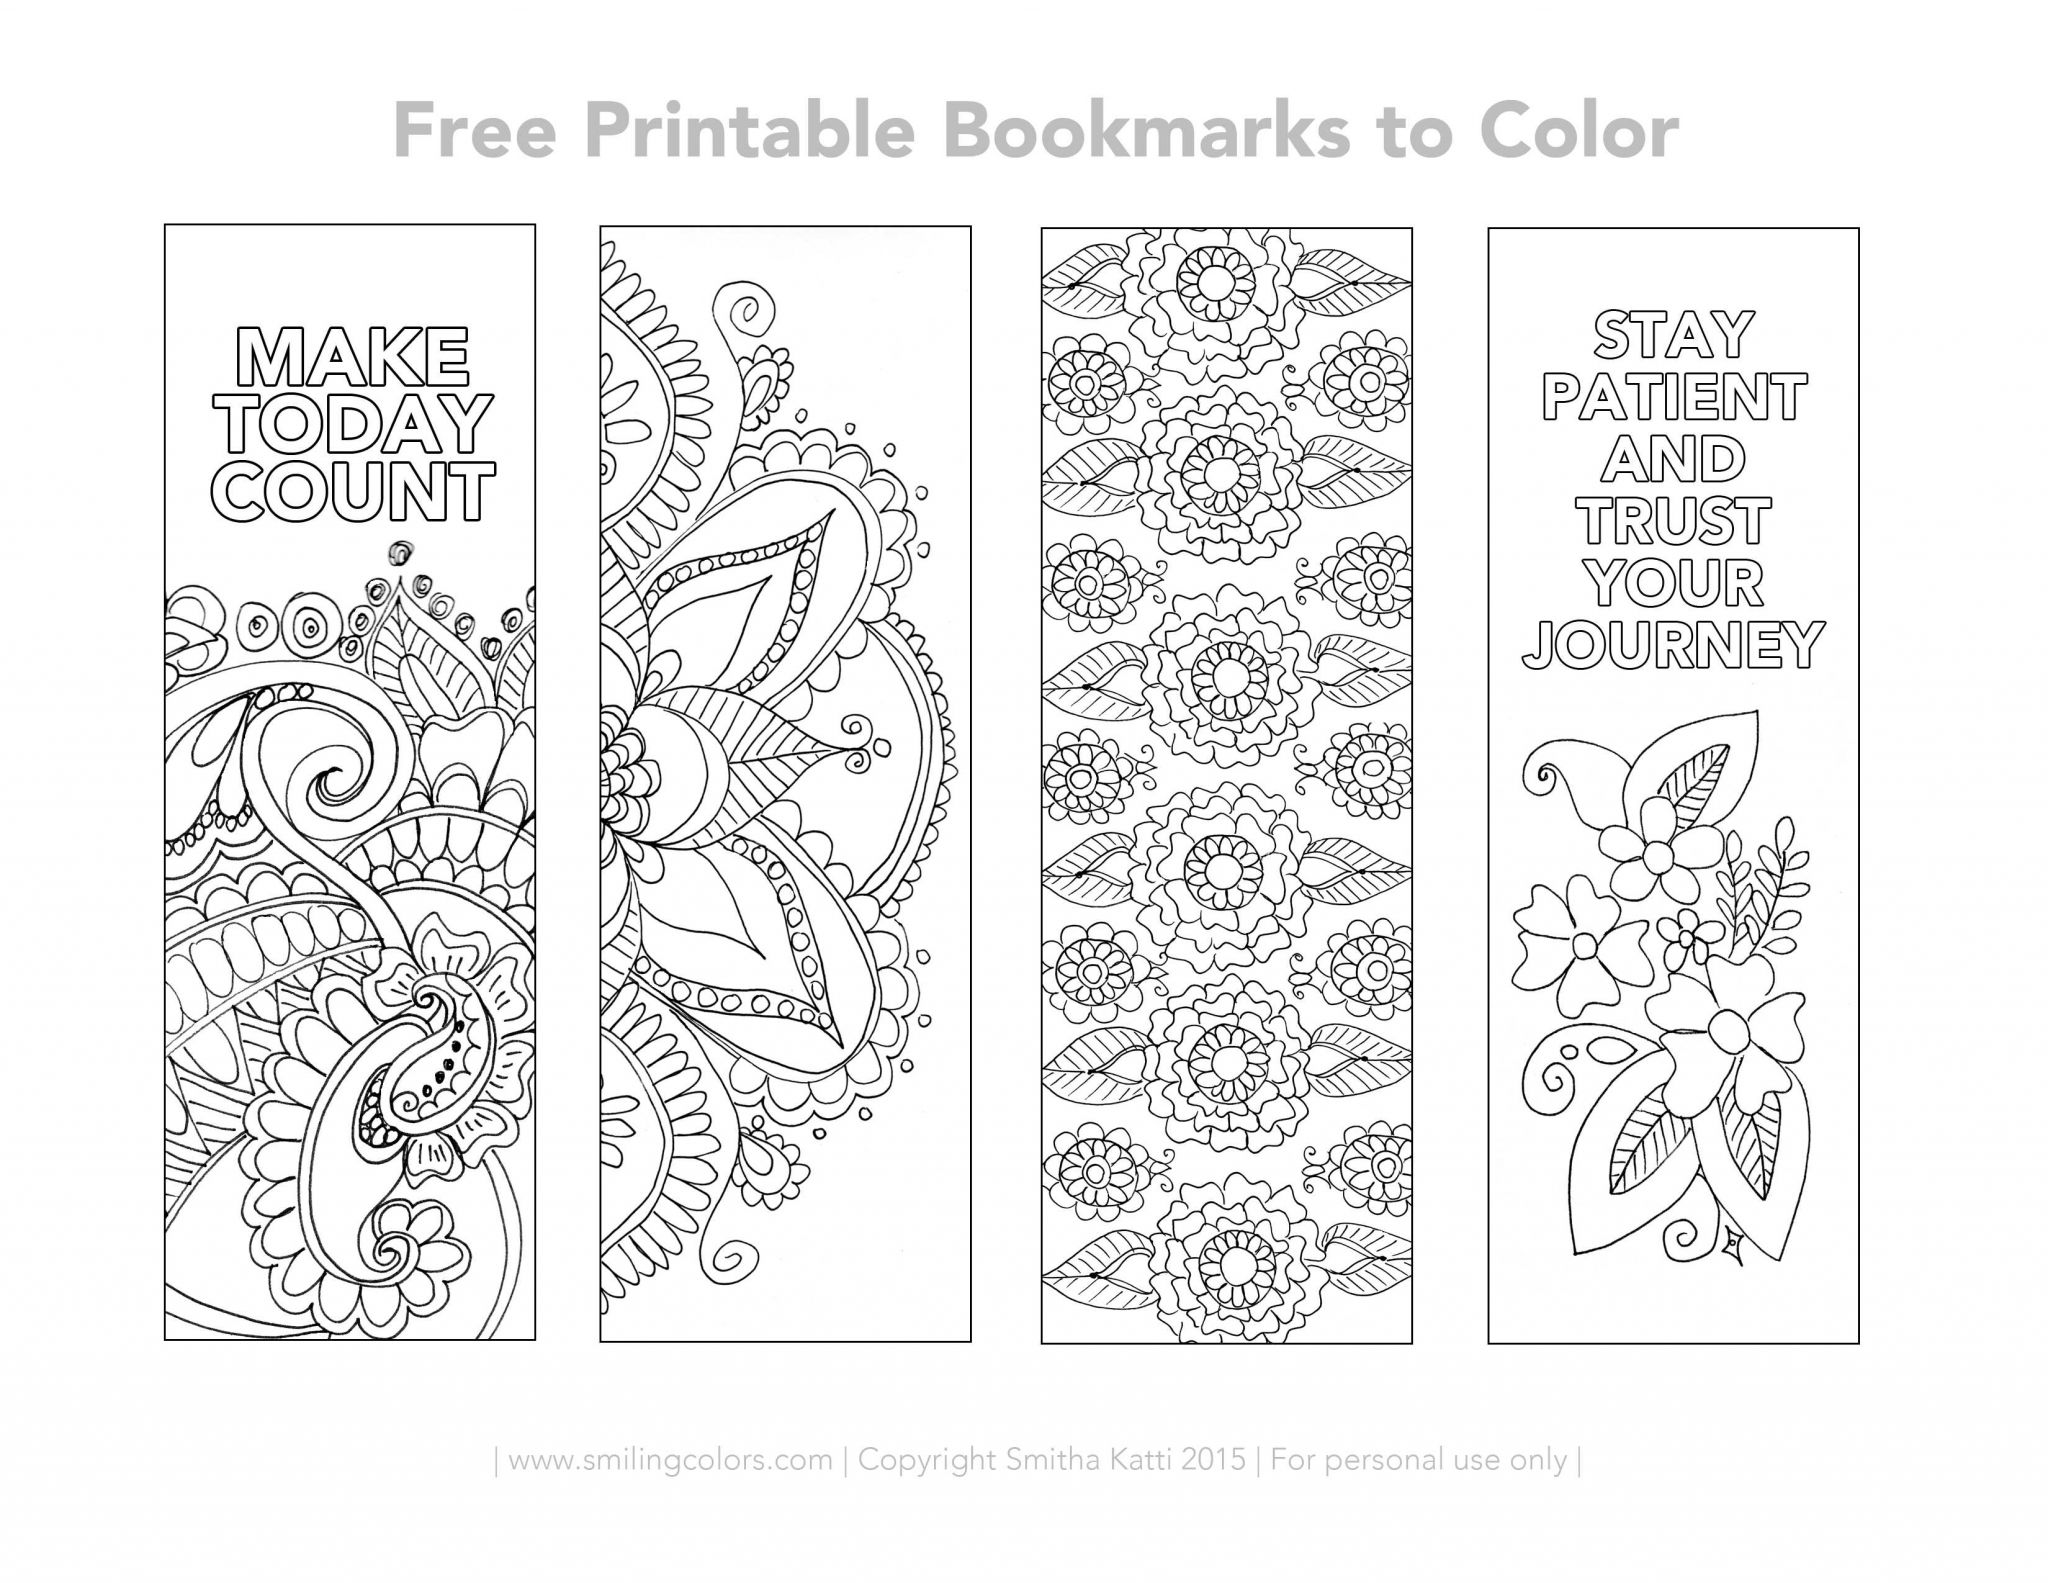 Books Of the Bible Worksheets as Well as Free Printable Bookmarks to Color Smiling Colors